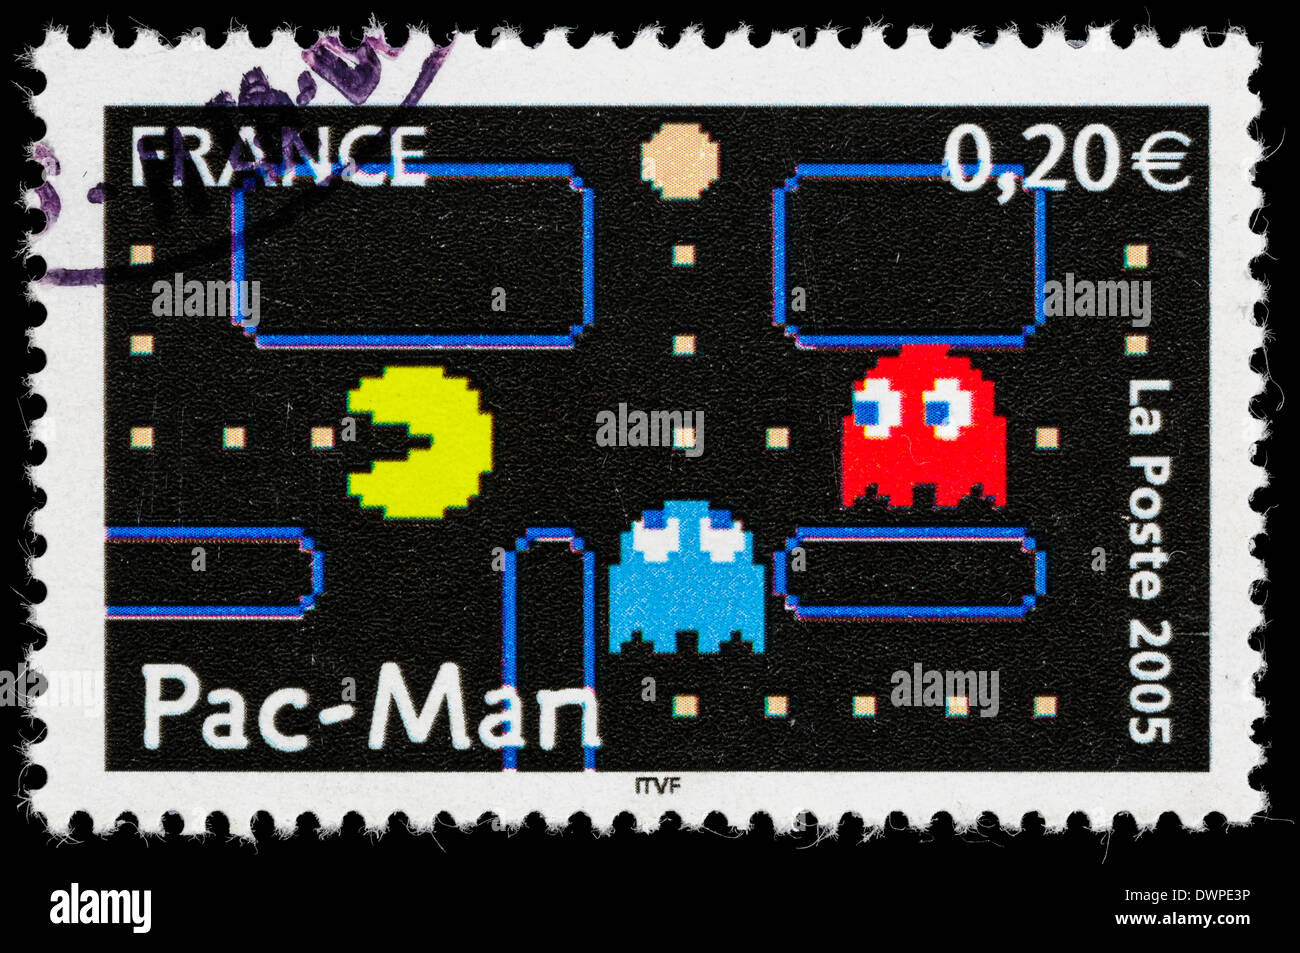 2005 France postage stamp with an illustration from the 1980s arcade video game, Pac-Man. Stock Photo